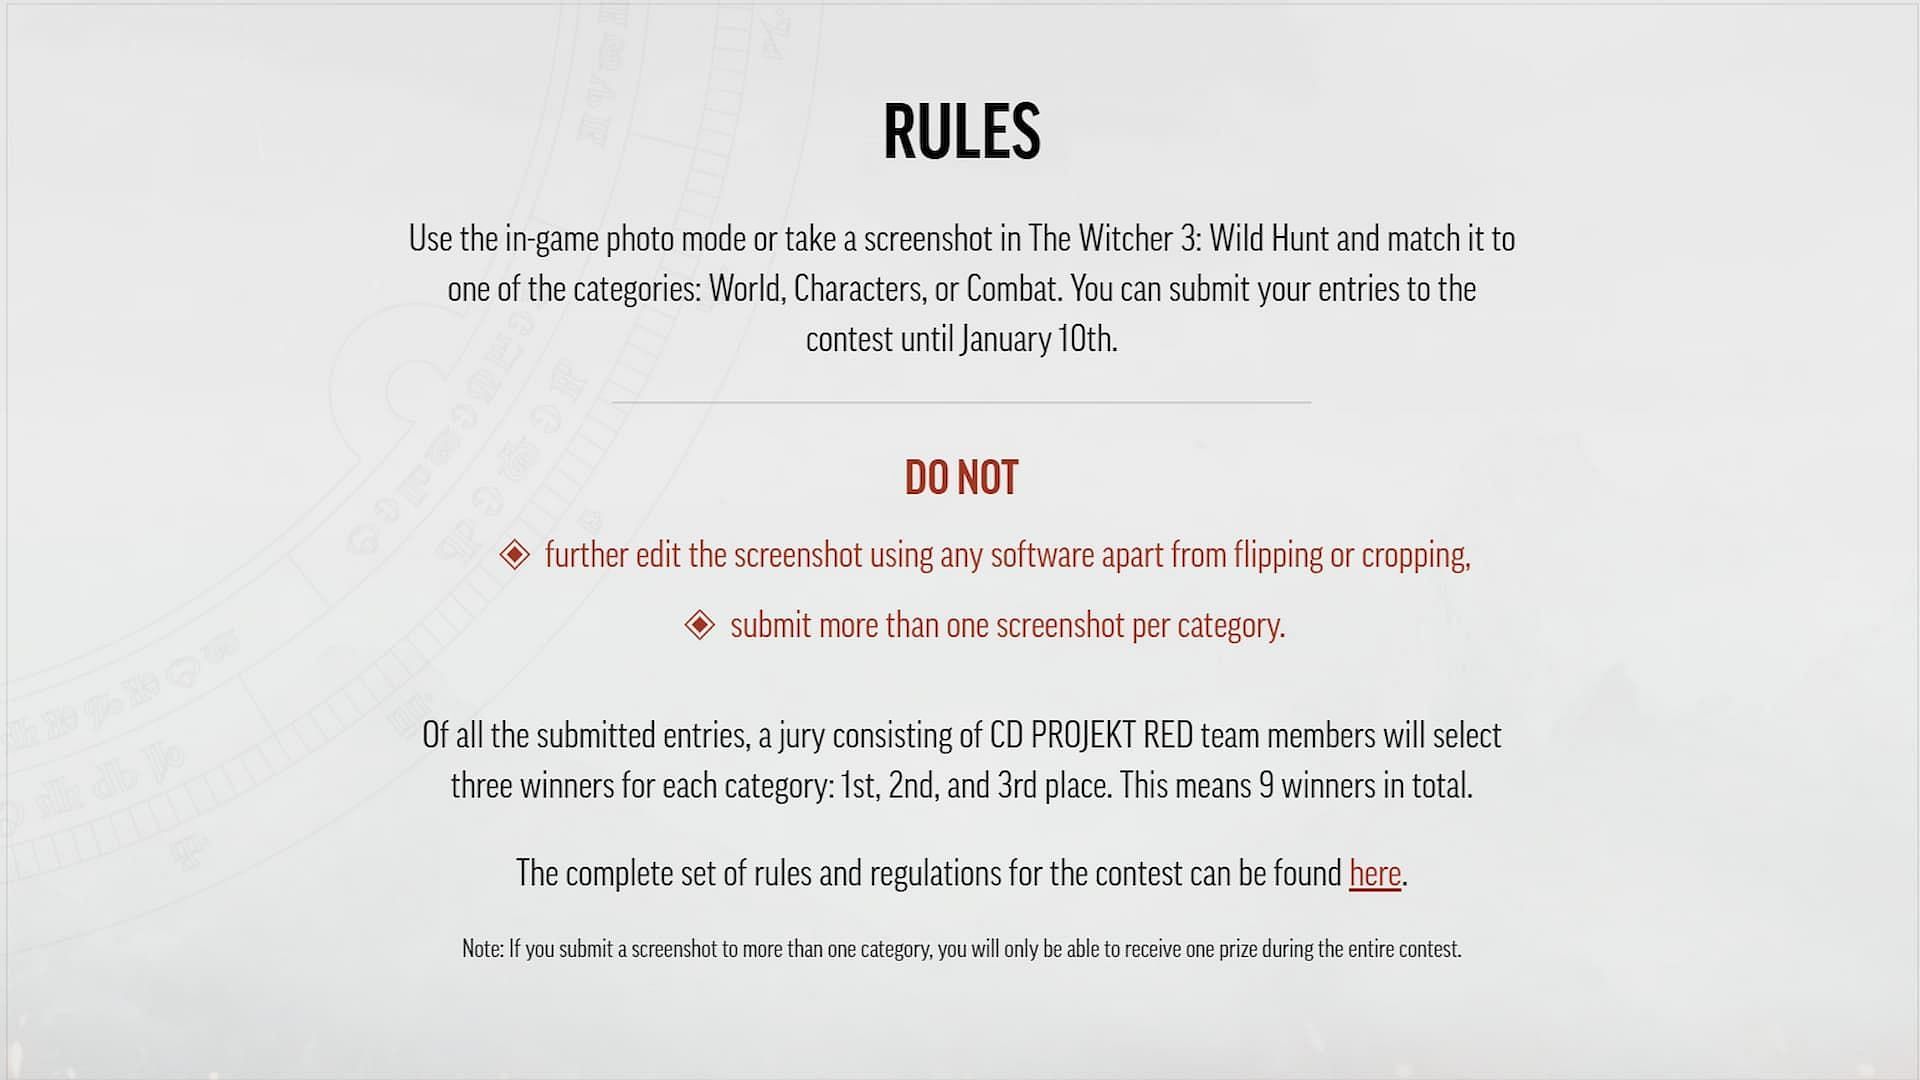 Rules of The Witcher 3 Screenshot contest (Image via CD Projekt Red)